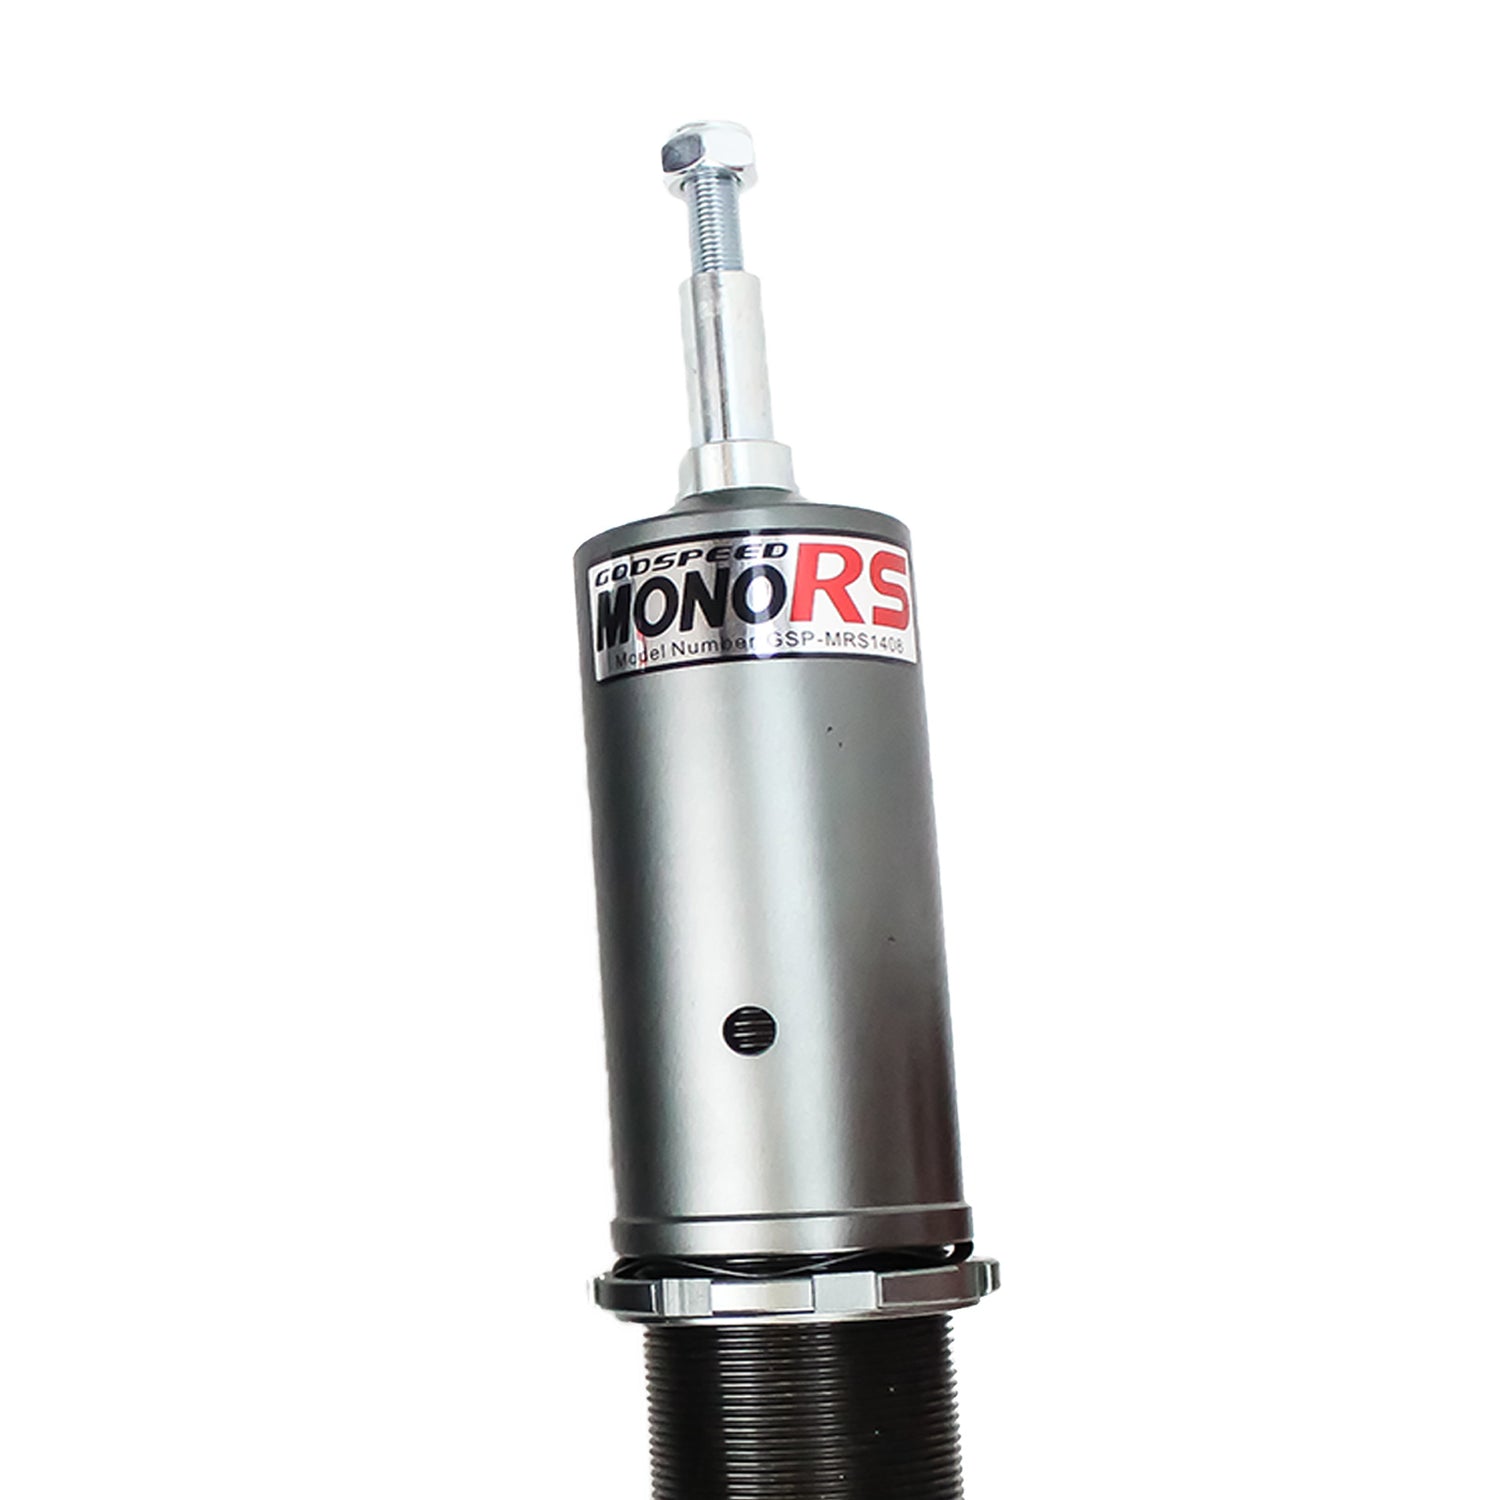 Godspeed MRS1408 MonoRS Coilover Lowering Kit, 32 Damping Adjustment, Ride Height Adjustable